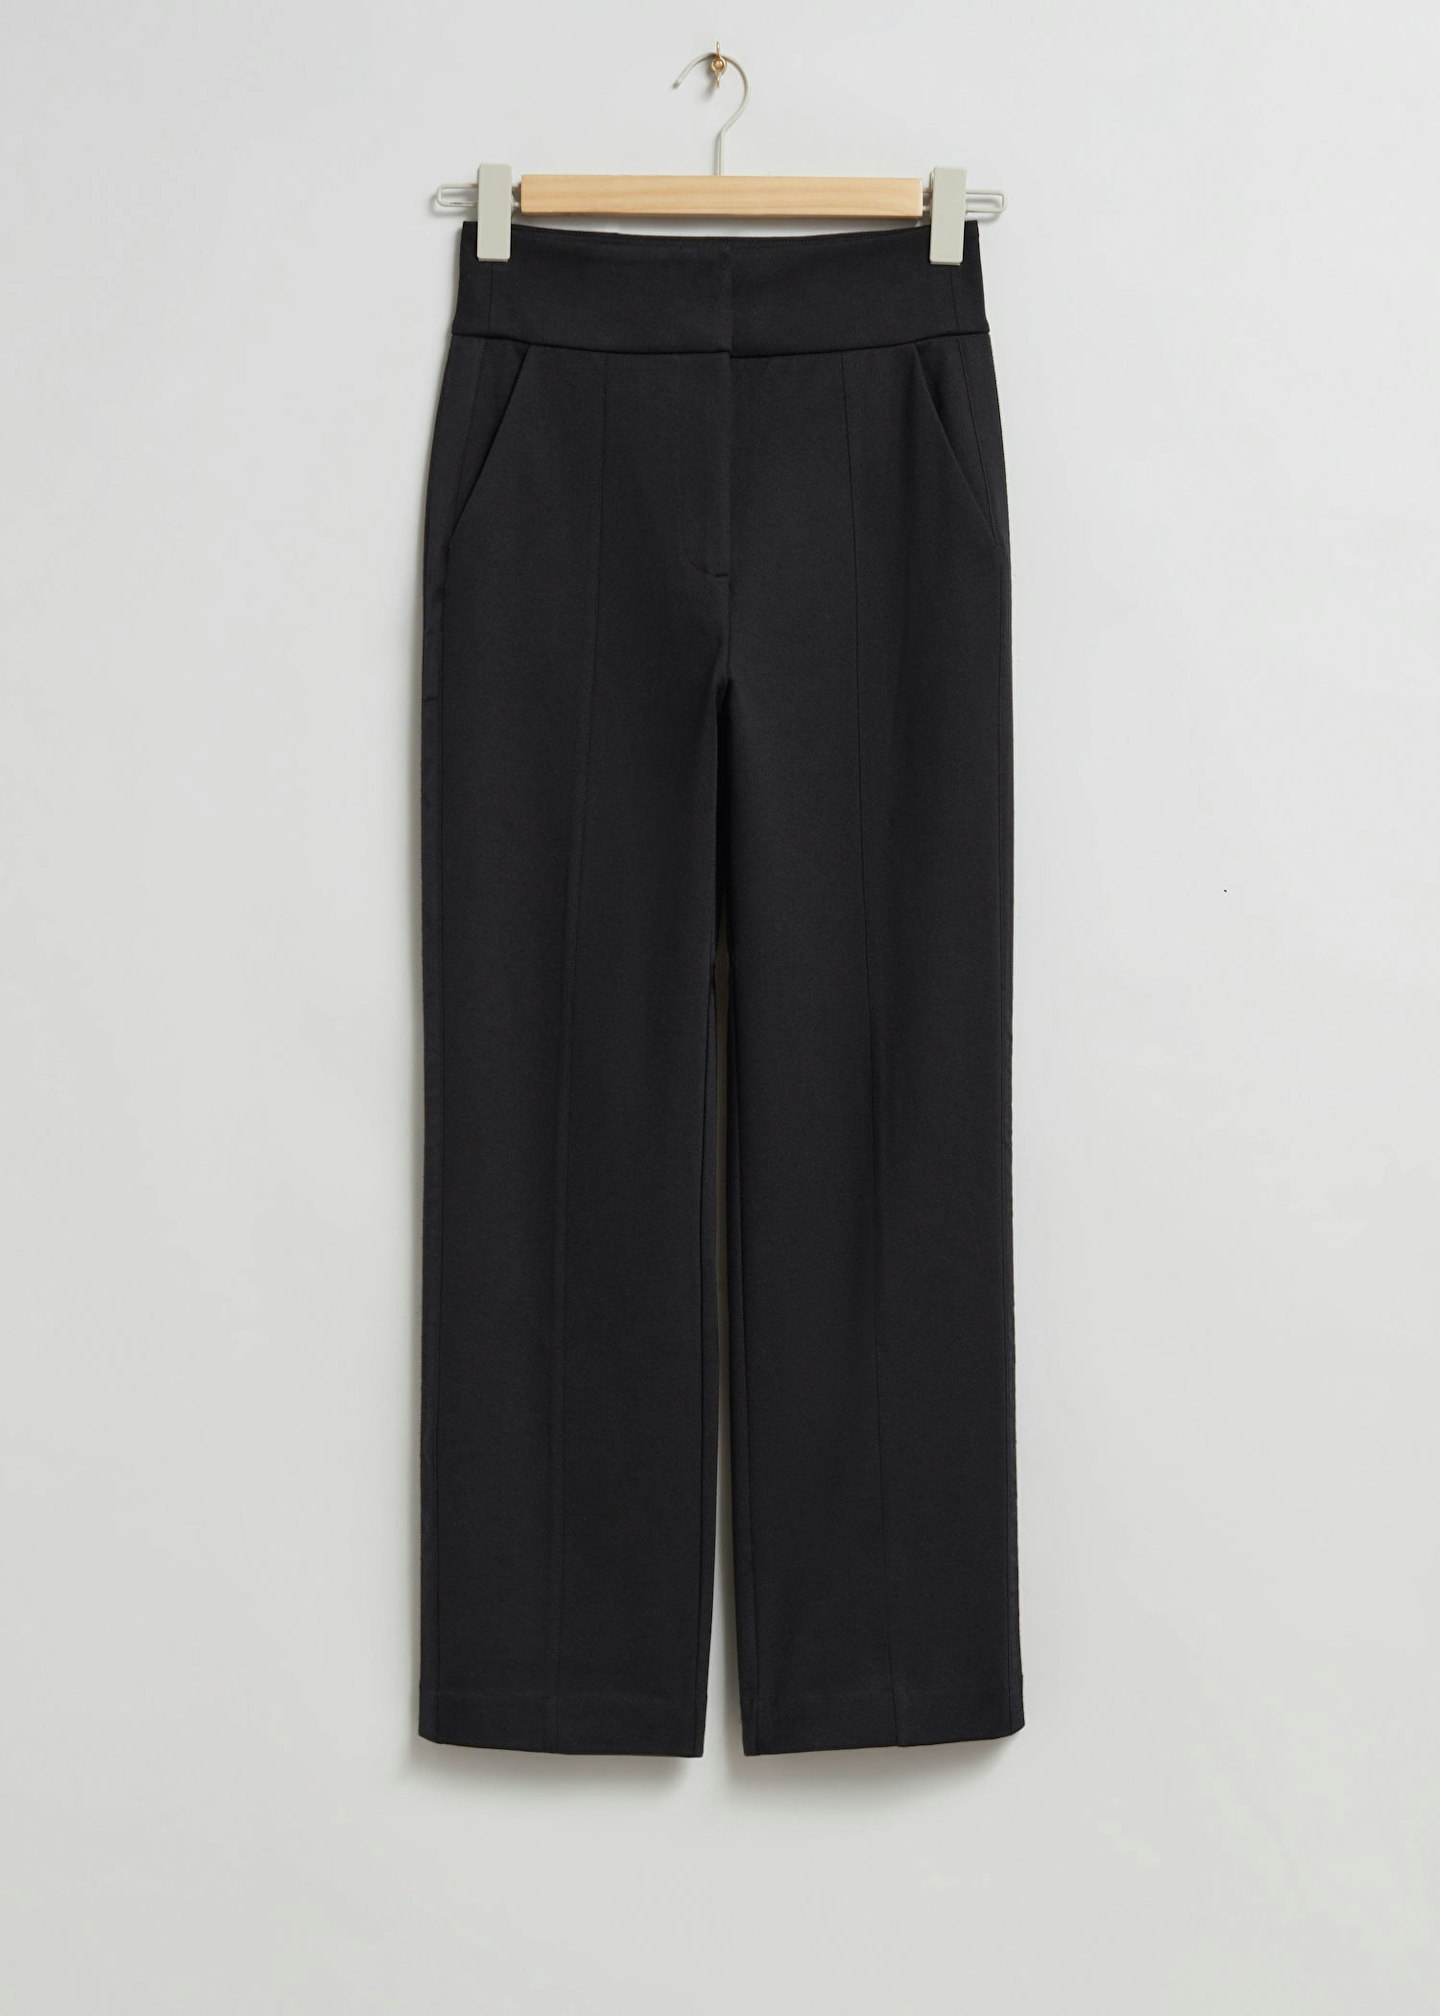 & Other Stories, Tailored Trousers